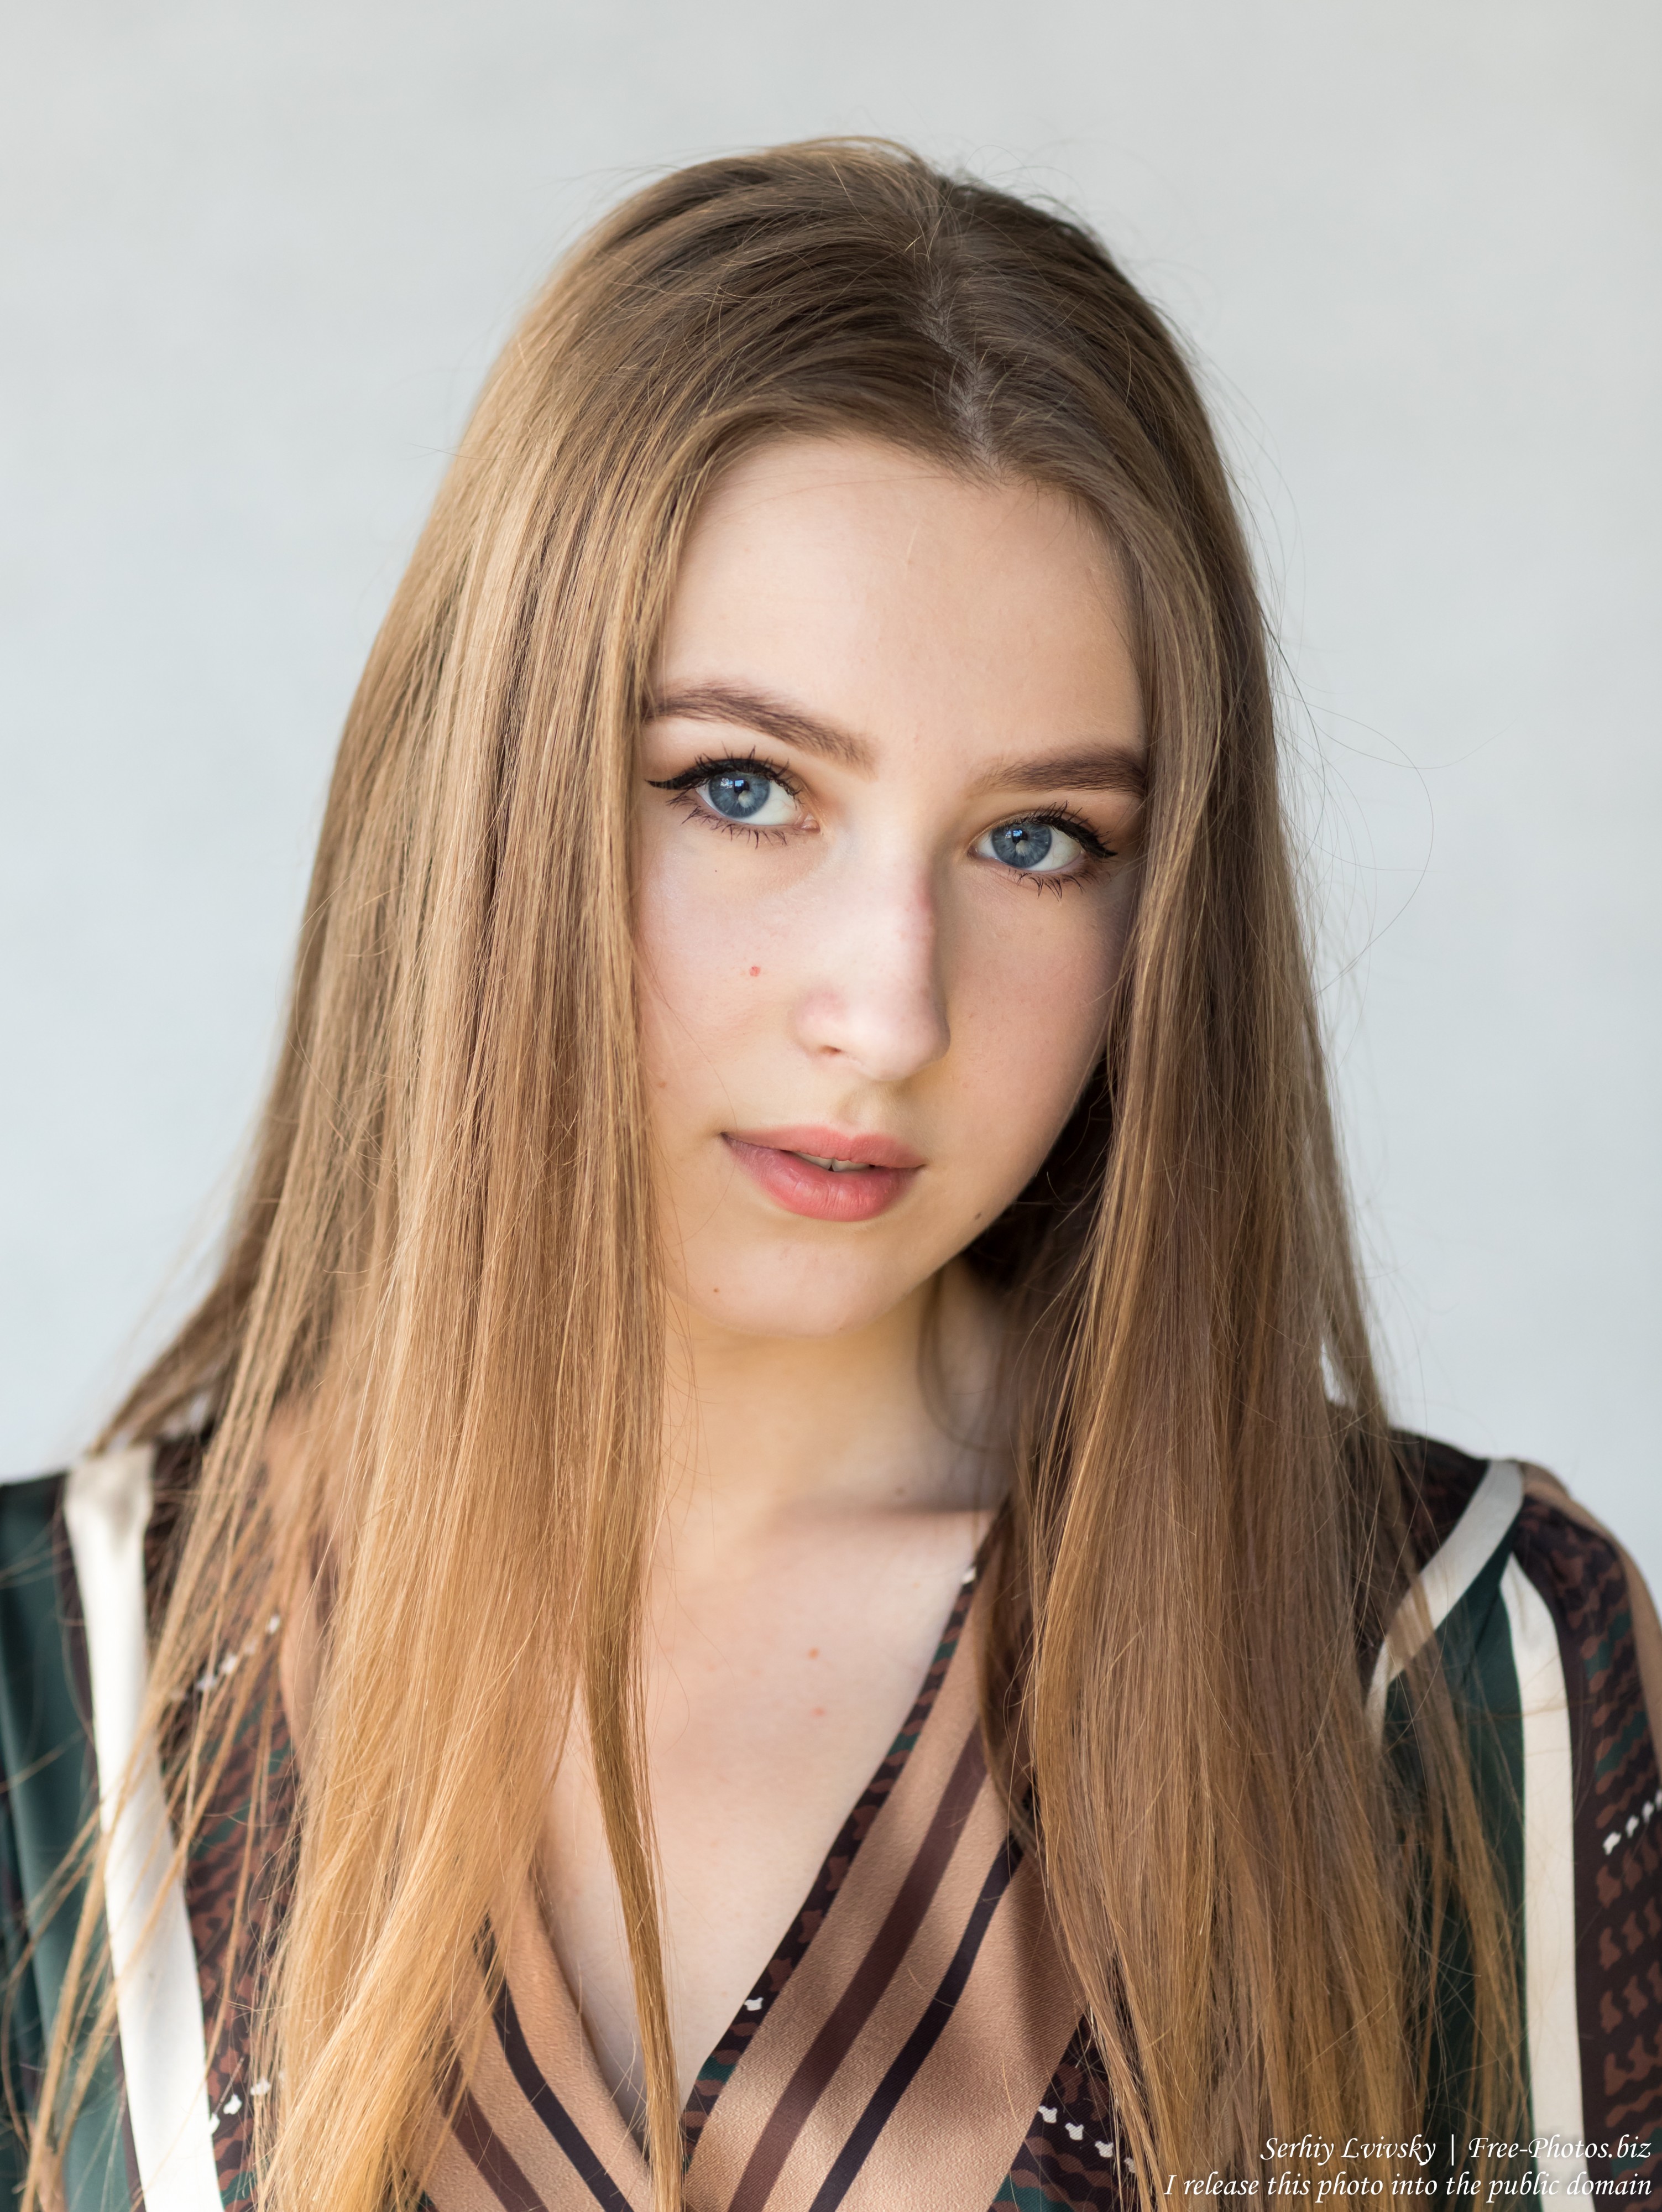 Vika - a 17-year-old girl with blue eyes and natural fair hair photographed in June 2019 by Serhiy Lvivsky, picture 8